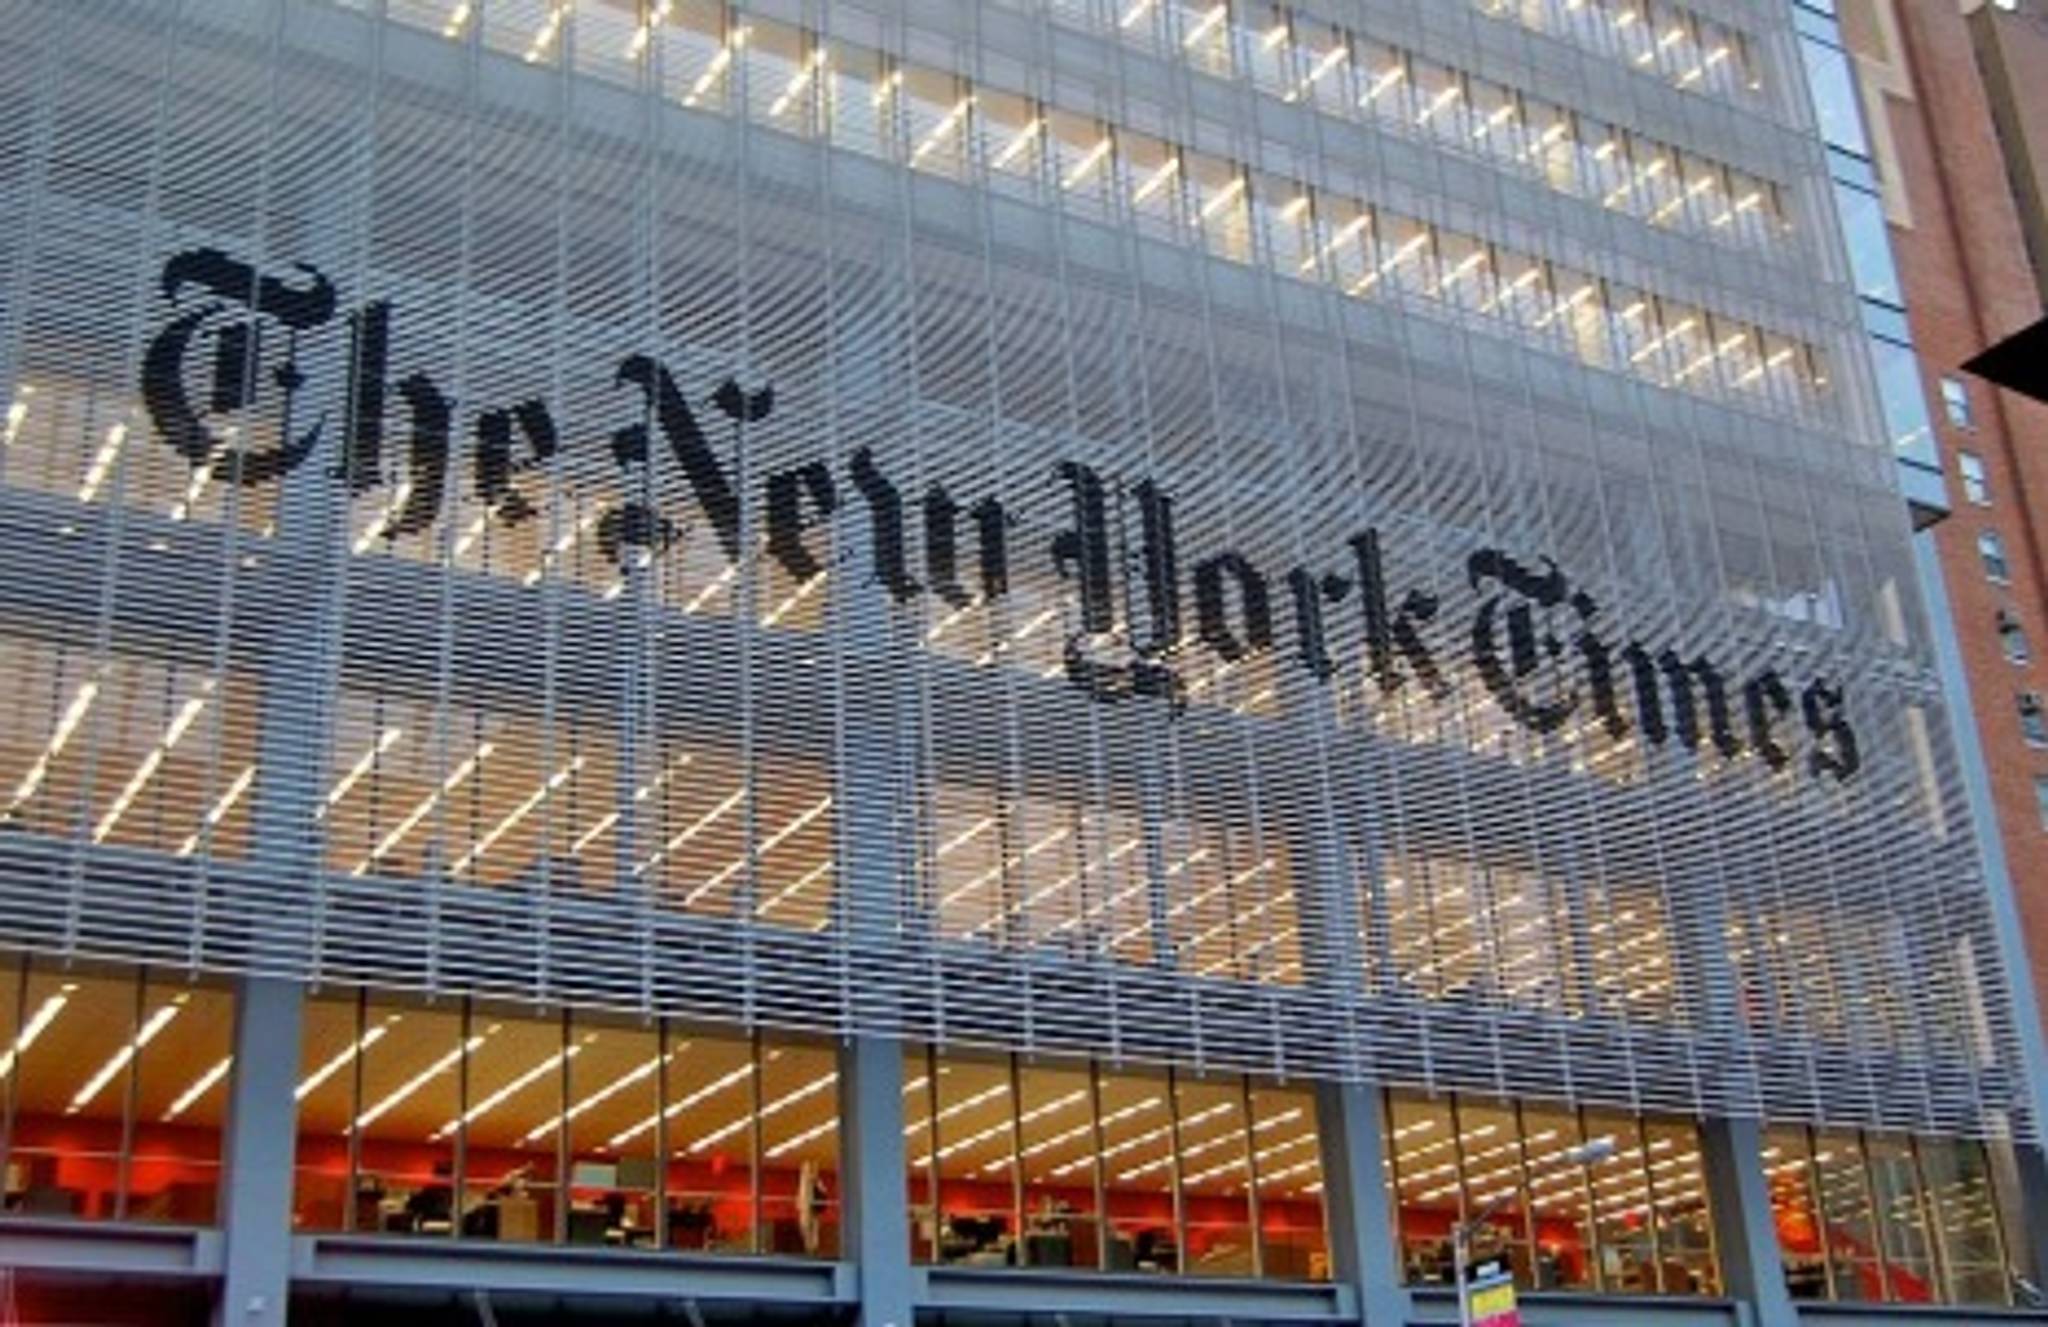 New York Times embraces streaming